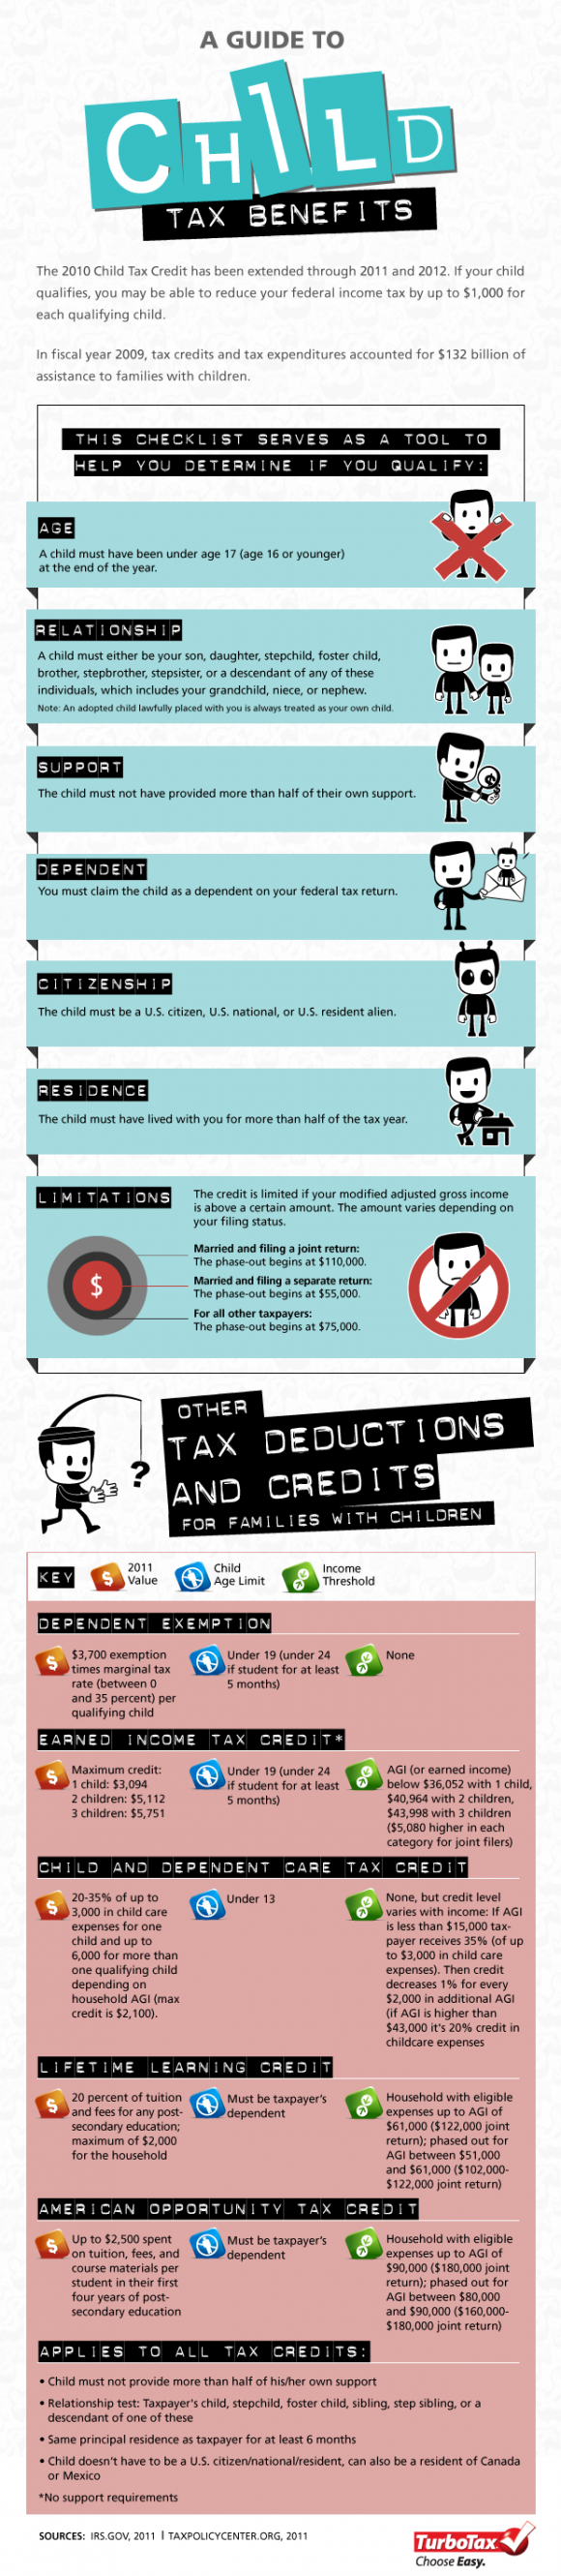 A Guide To Child Tax Benefits Infographic 